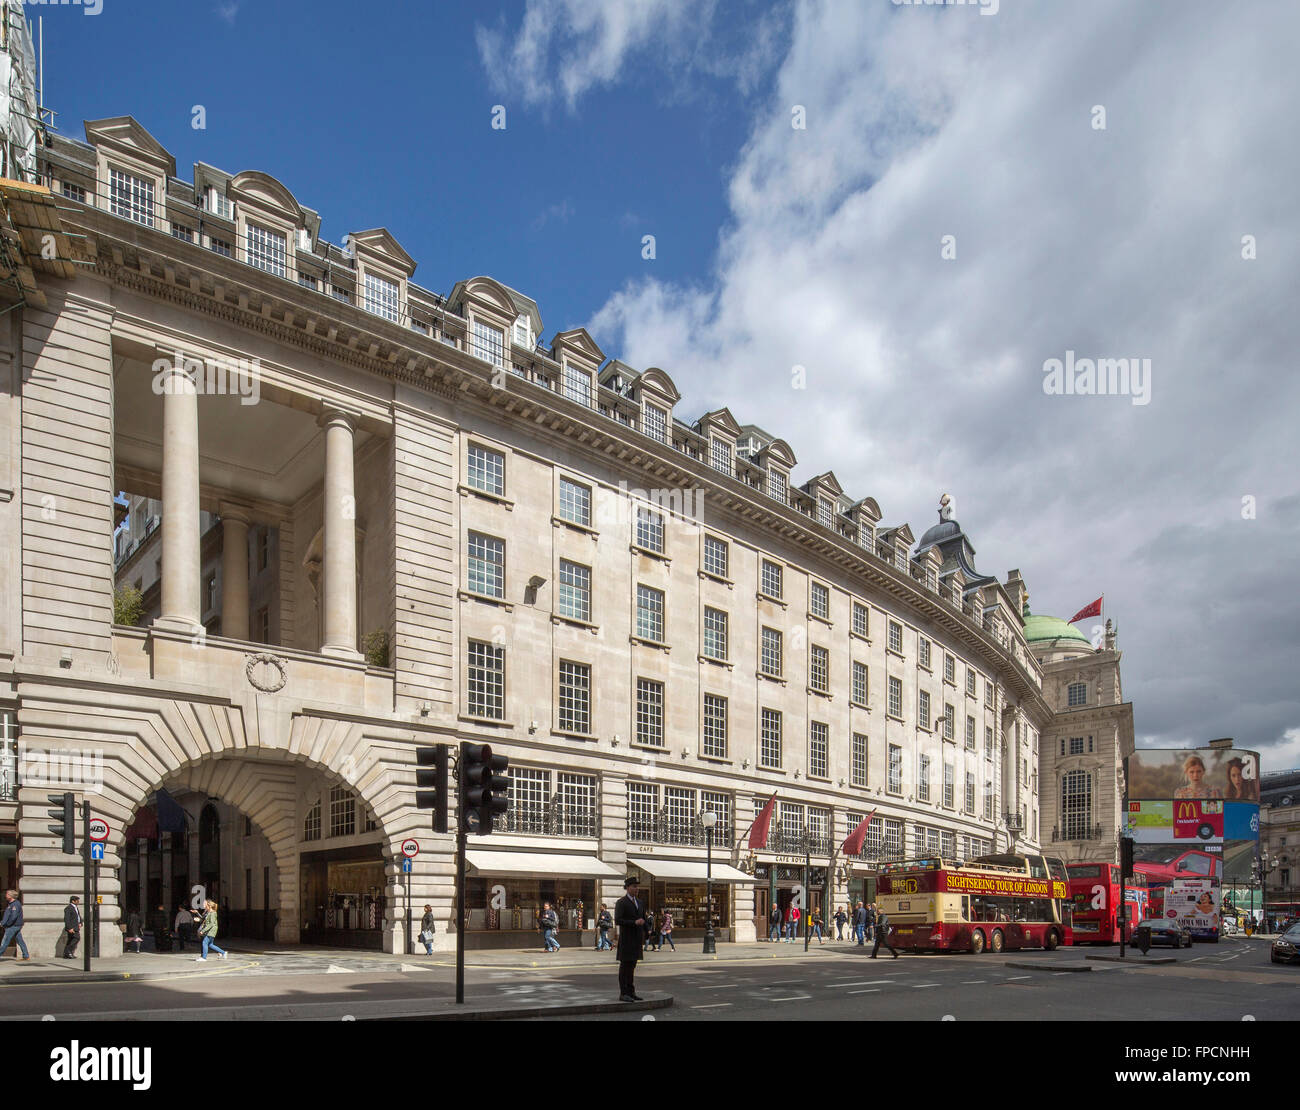 An exterior view of a famous building in London, The Cafe Royal. Stock Photo